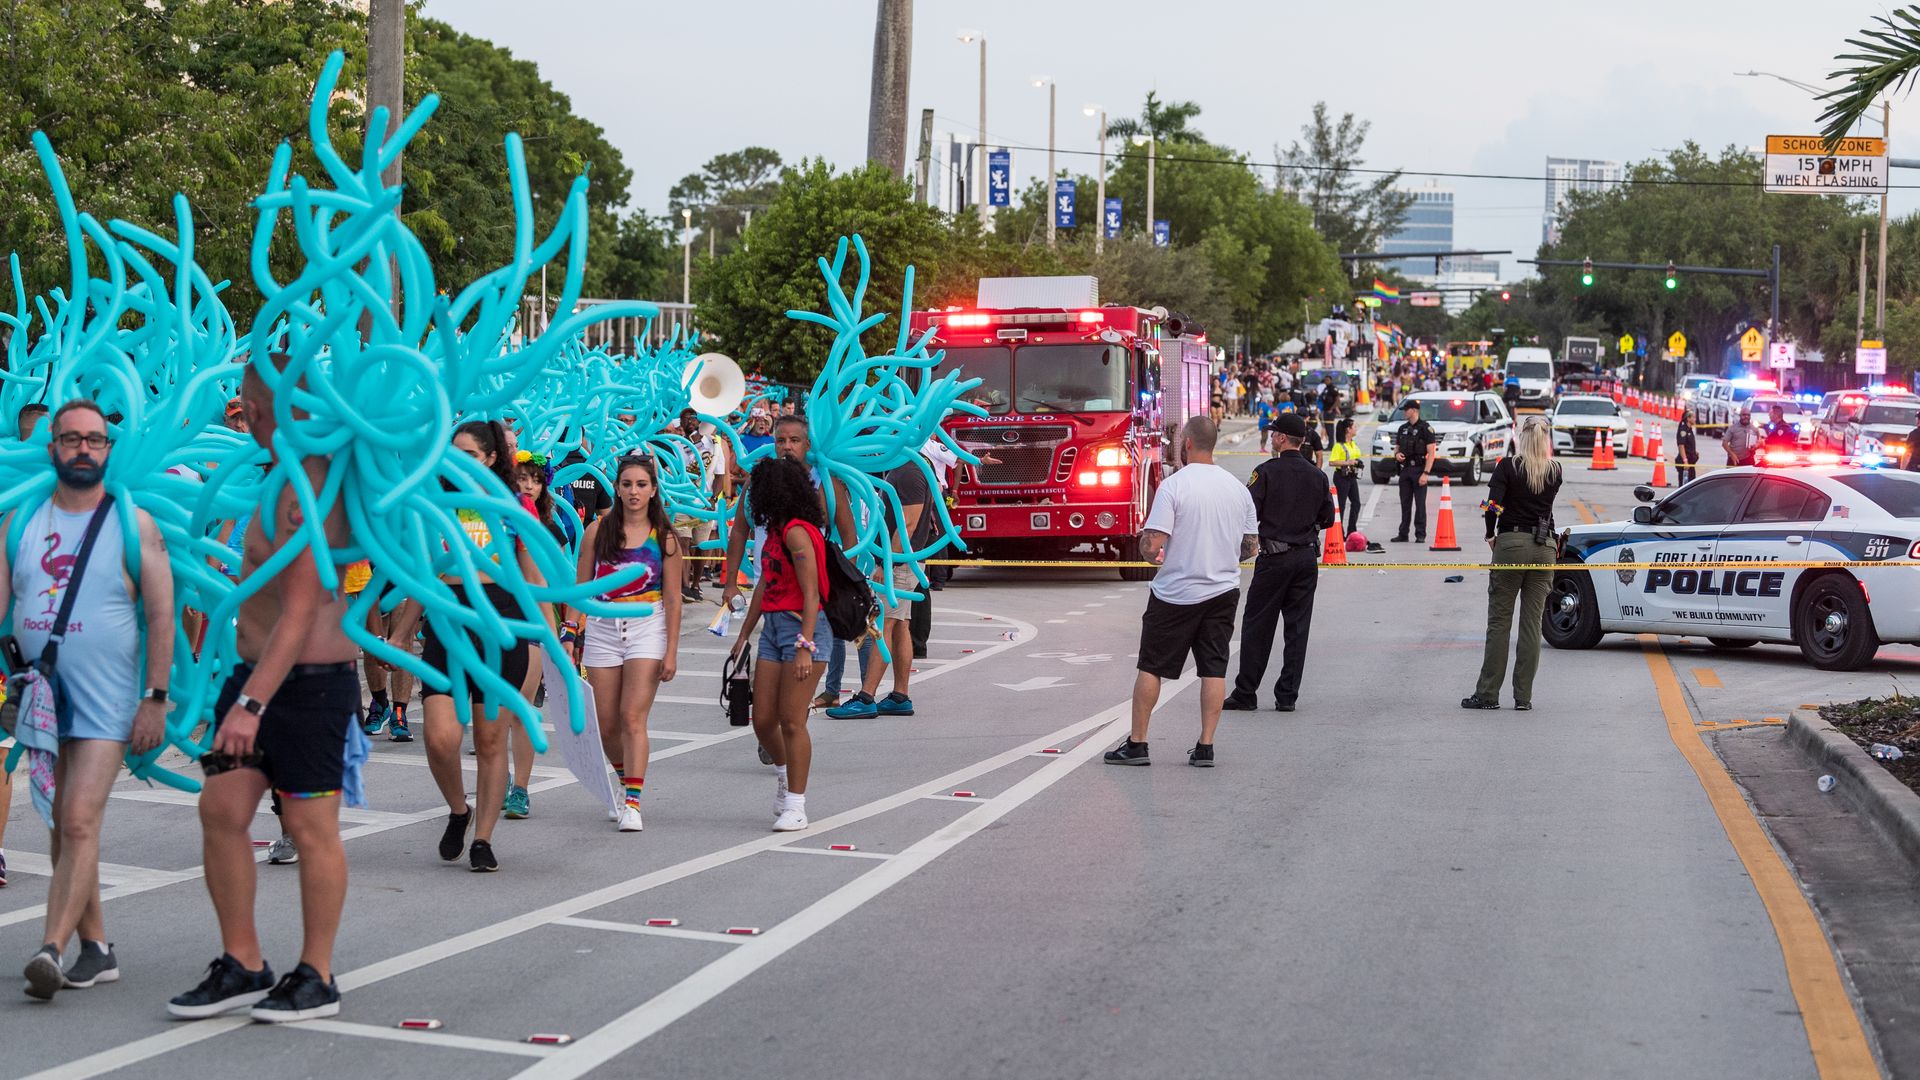  Parade participants walk away as police investigate the scene where a pickup truck drove into a crowd of people at a Pride parade on June 19, 2021 in Wilton Manors, Florida. 